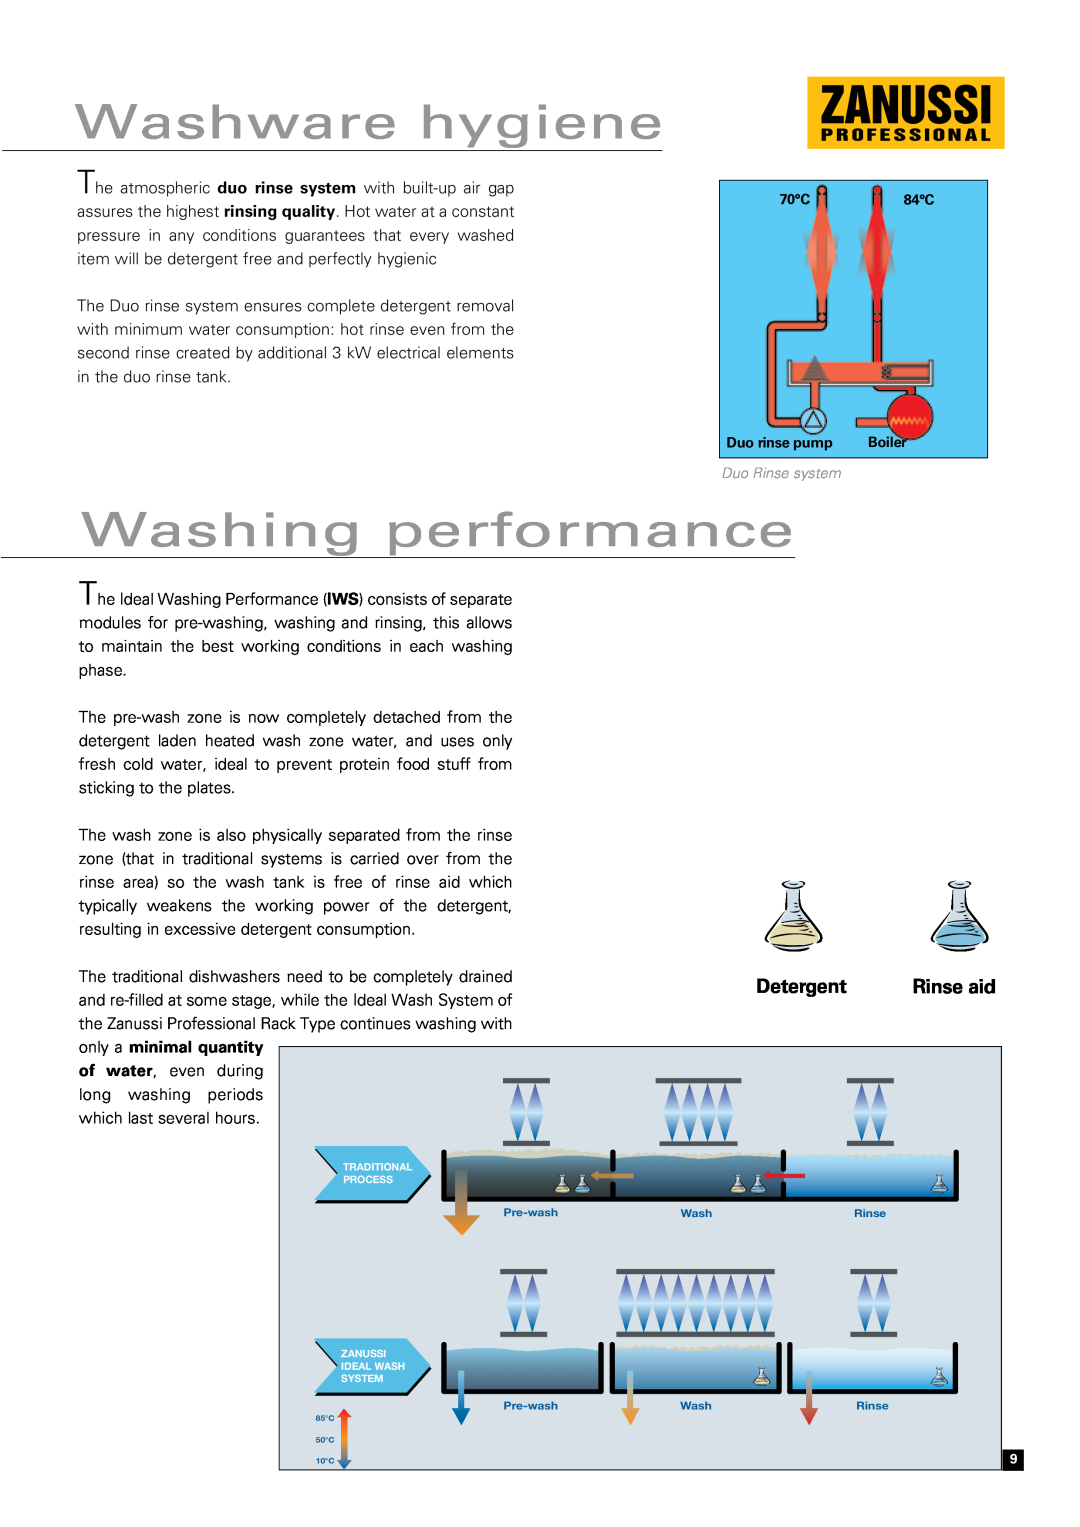 Zanussi RTCS 250, Snack 600, N 700 Washware hygiene, Washing performance, only a minimal quantity, Rinse aid, Detergent 